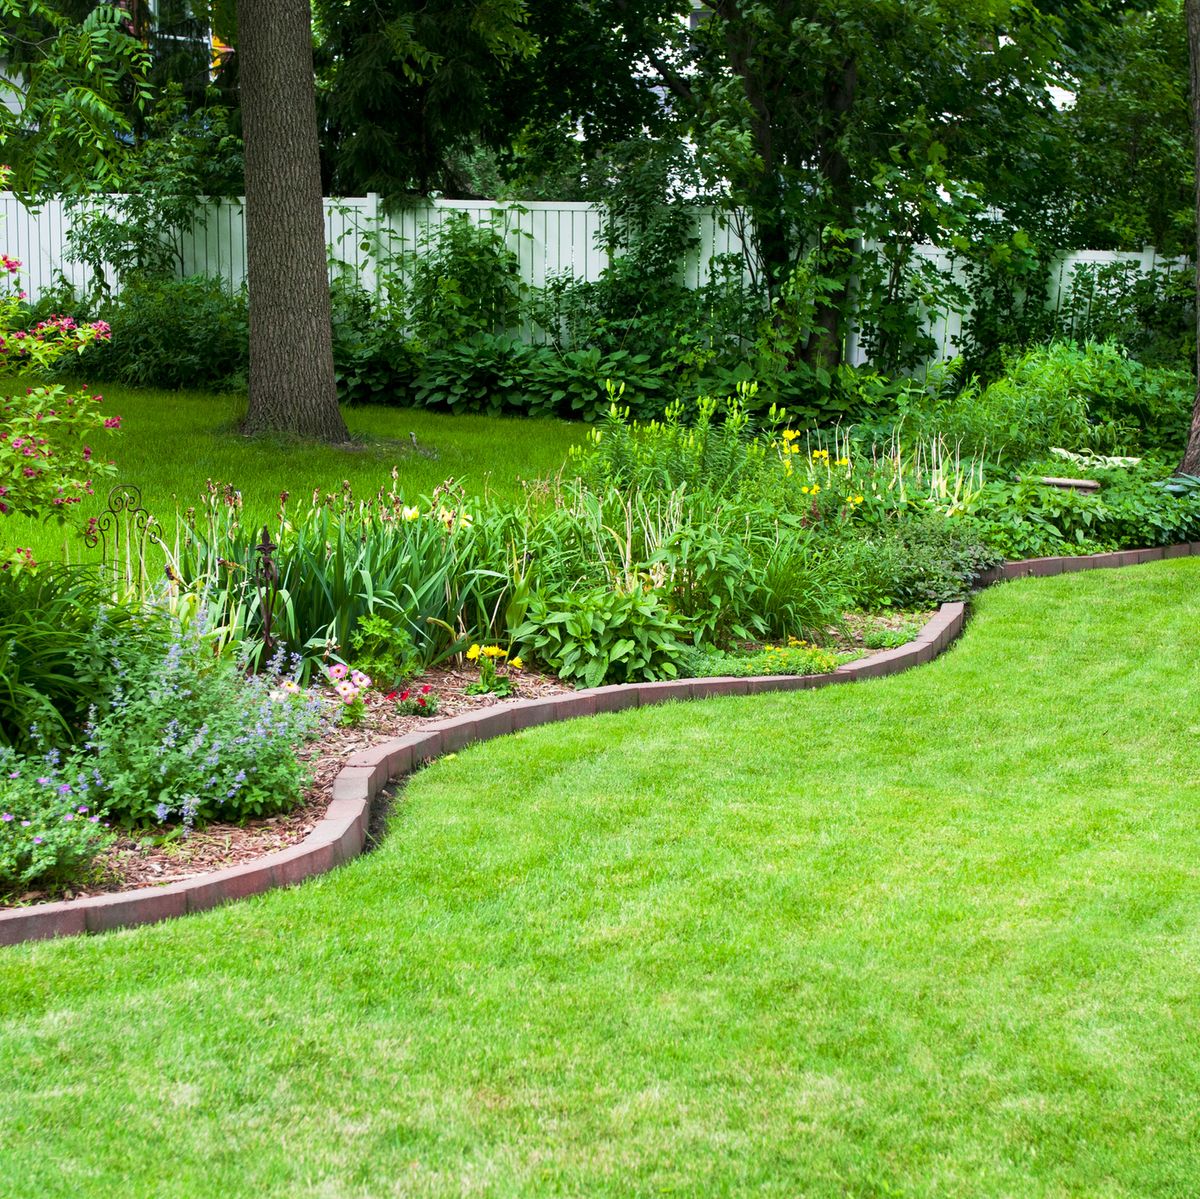 How to Create Perfect Edges for Your Garden Beds and Borders